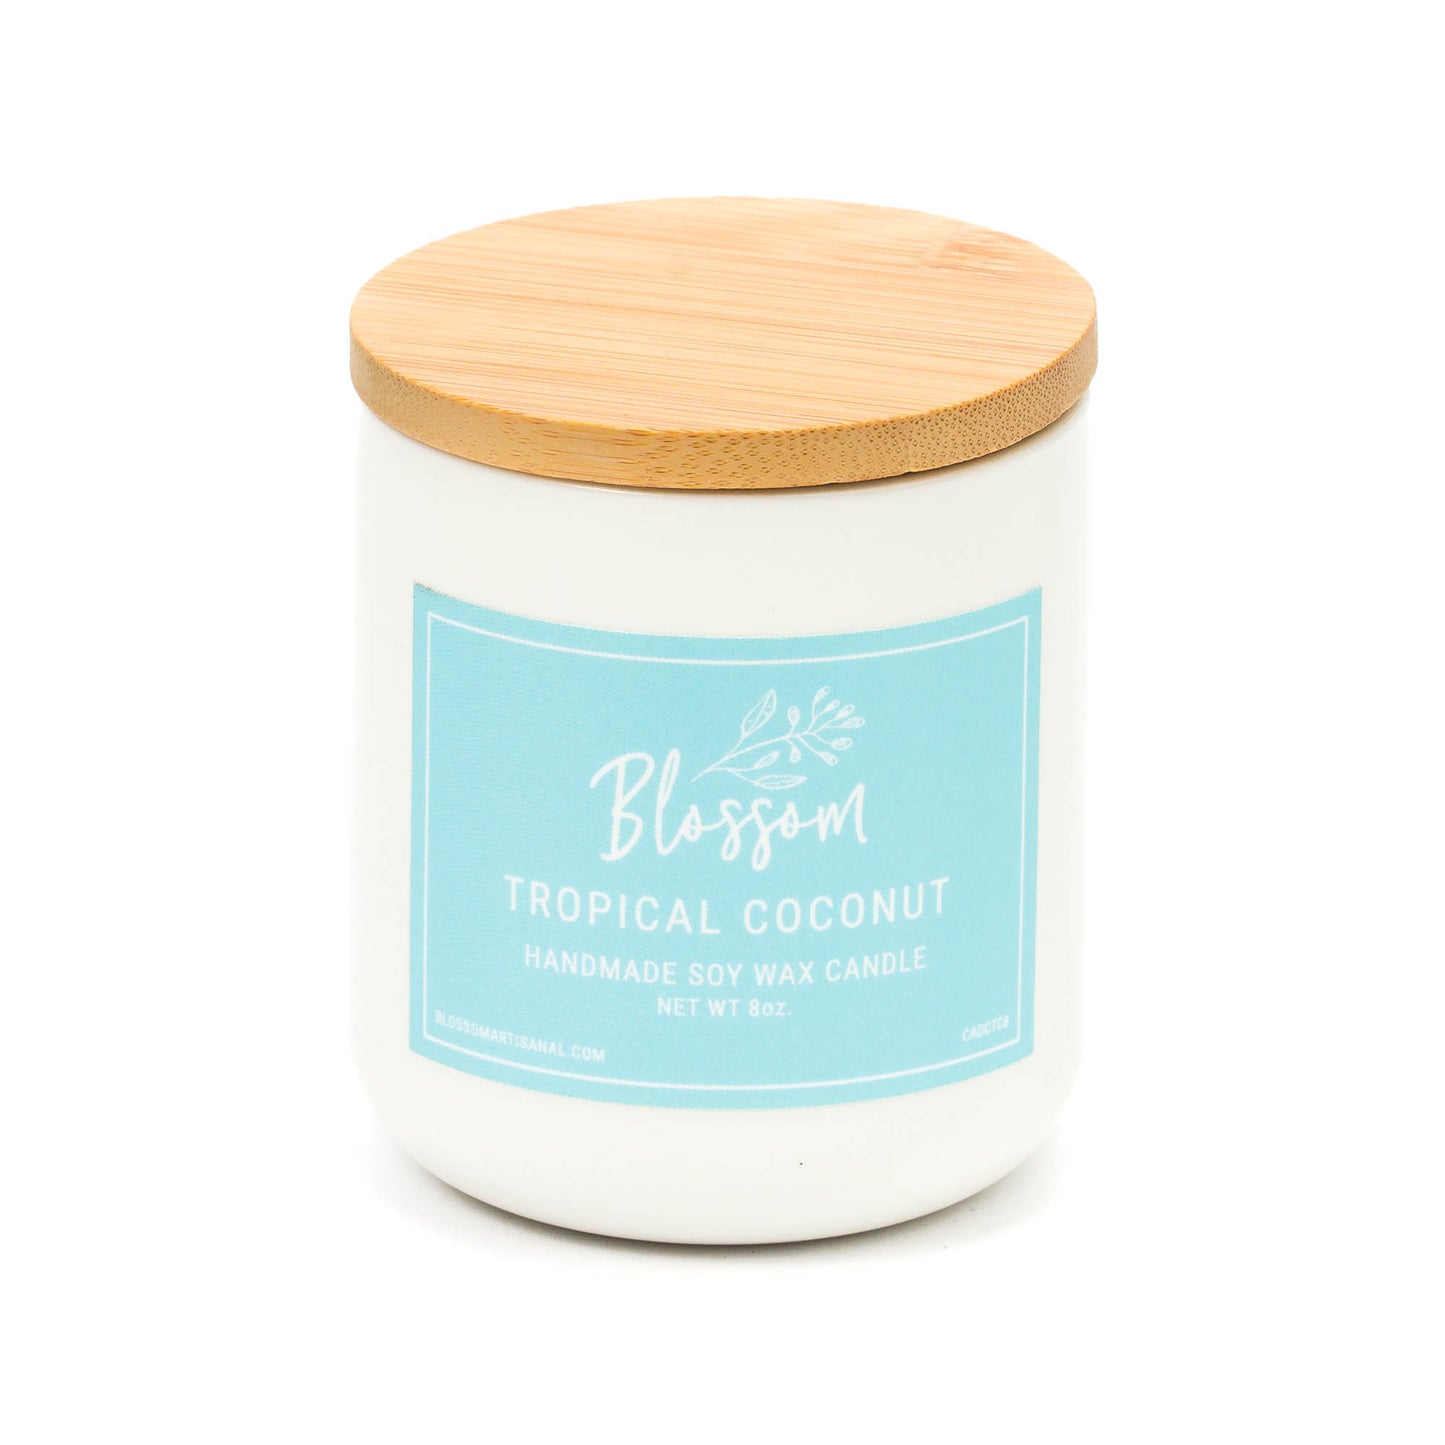 White Ceramic Decorative Soy Wax Candle Essential Oil Scent 8oz Tropical Coconut